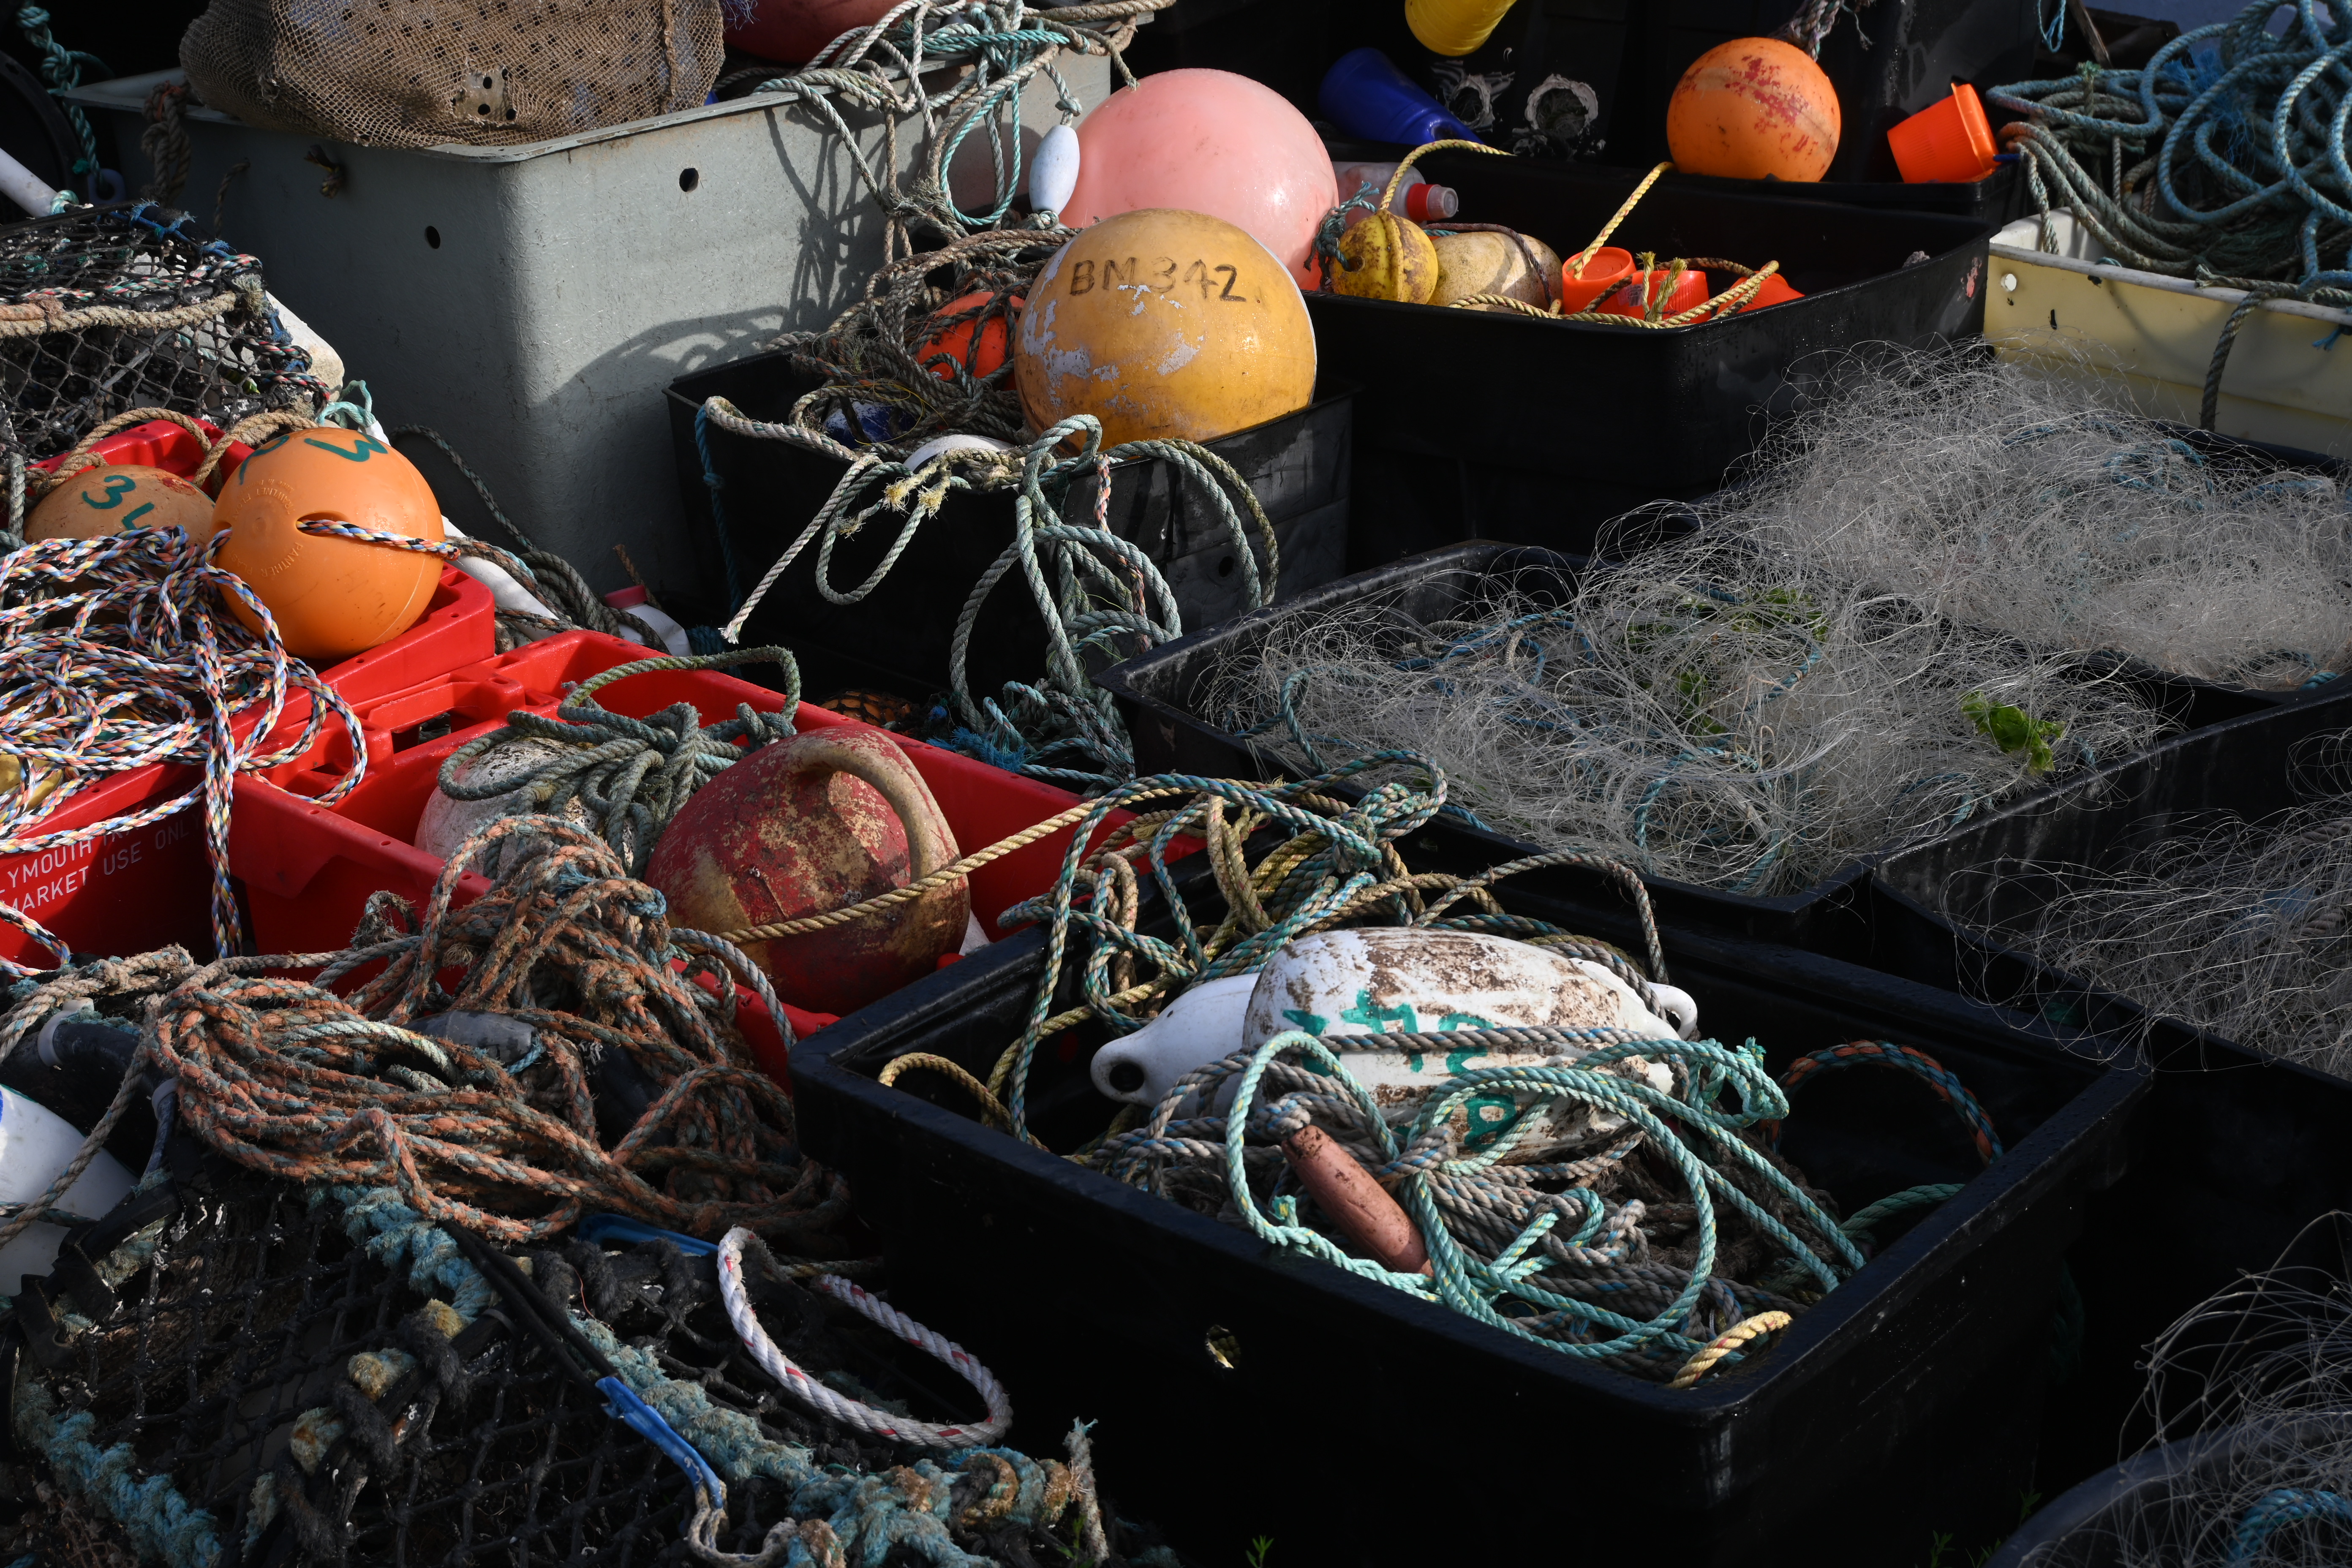 Crates of fishing ropes and buoys